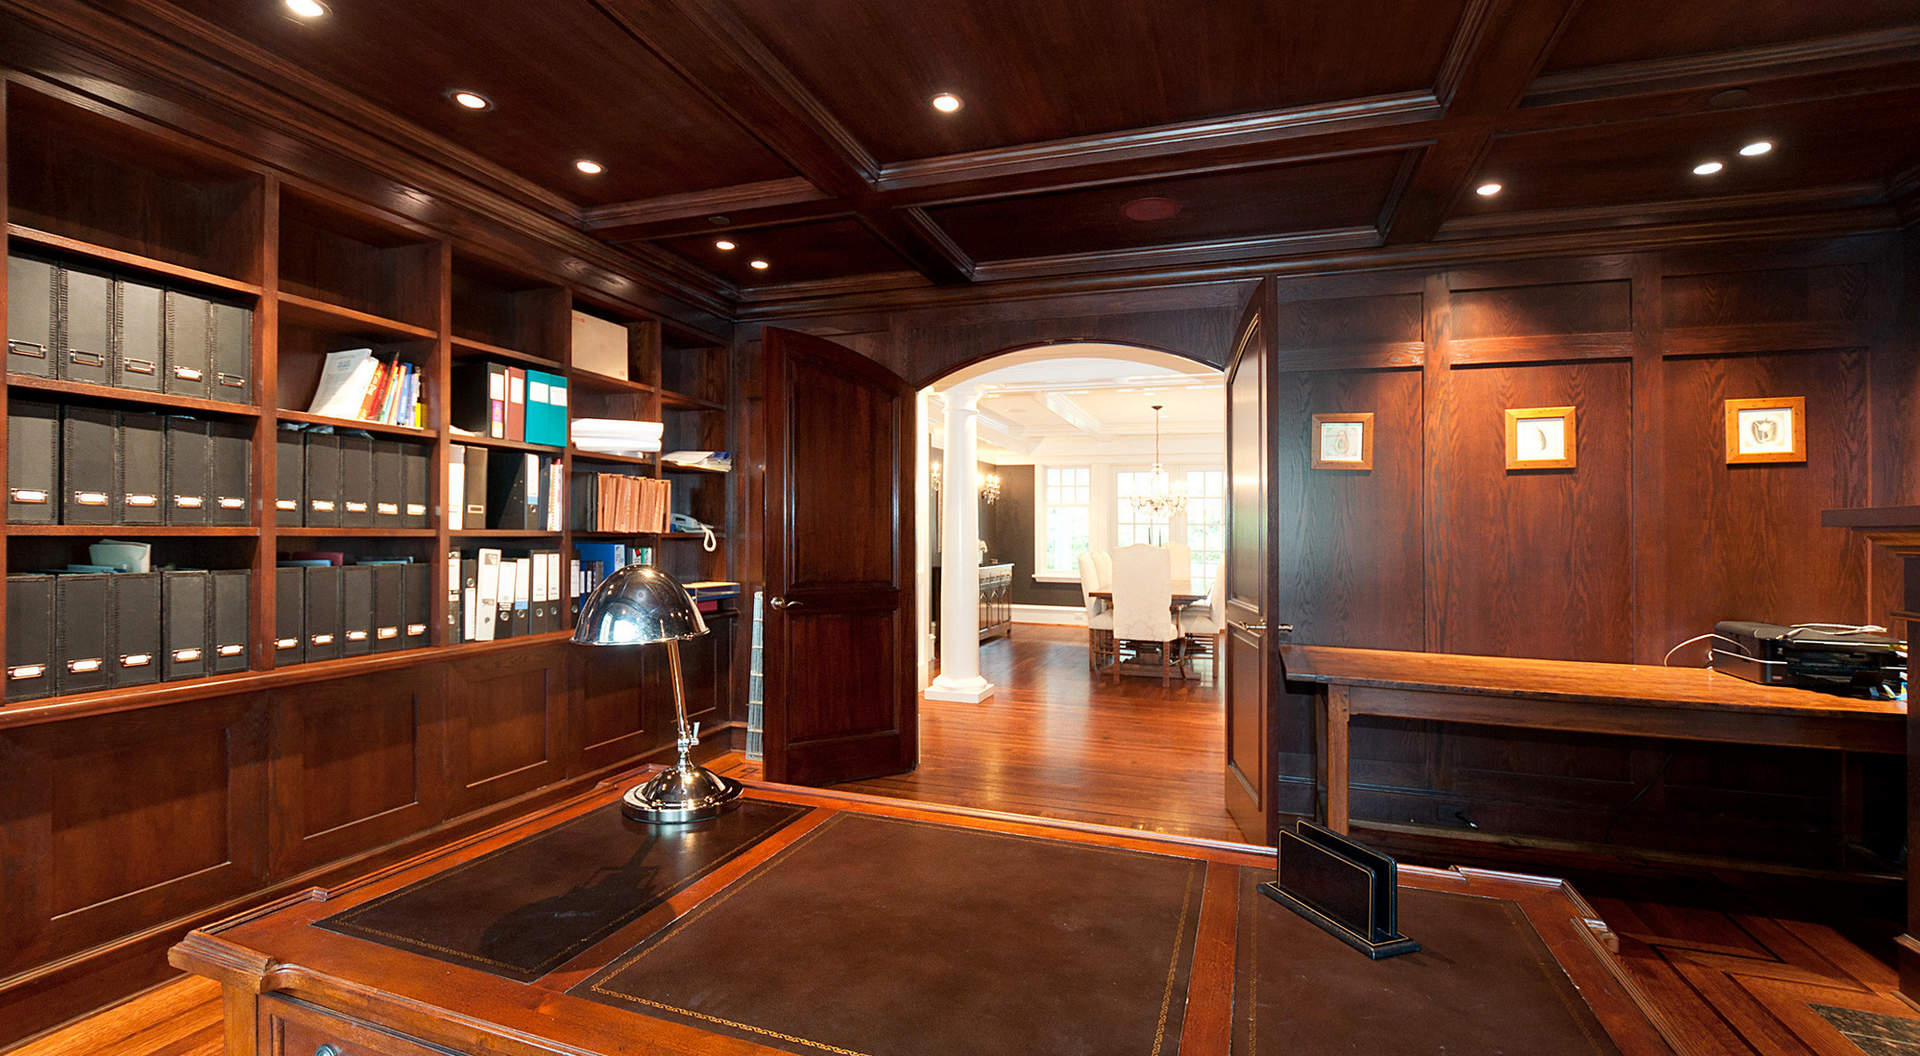 Sophisticated Study with Paneled Walls and Coffered Ceilings